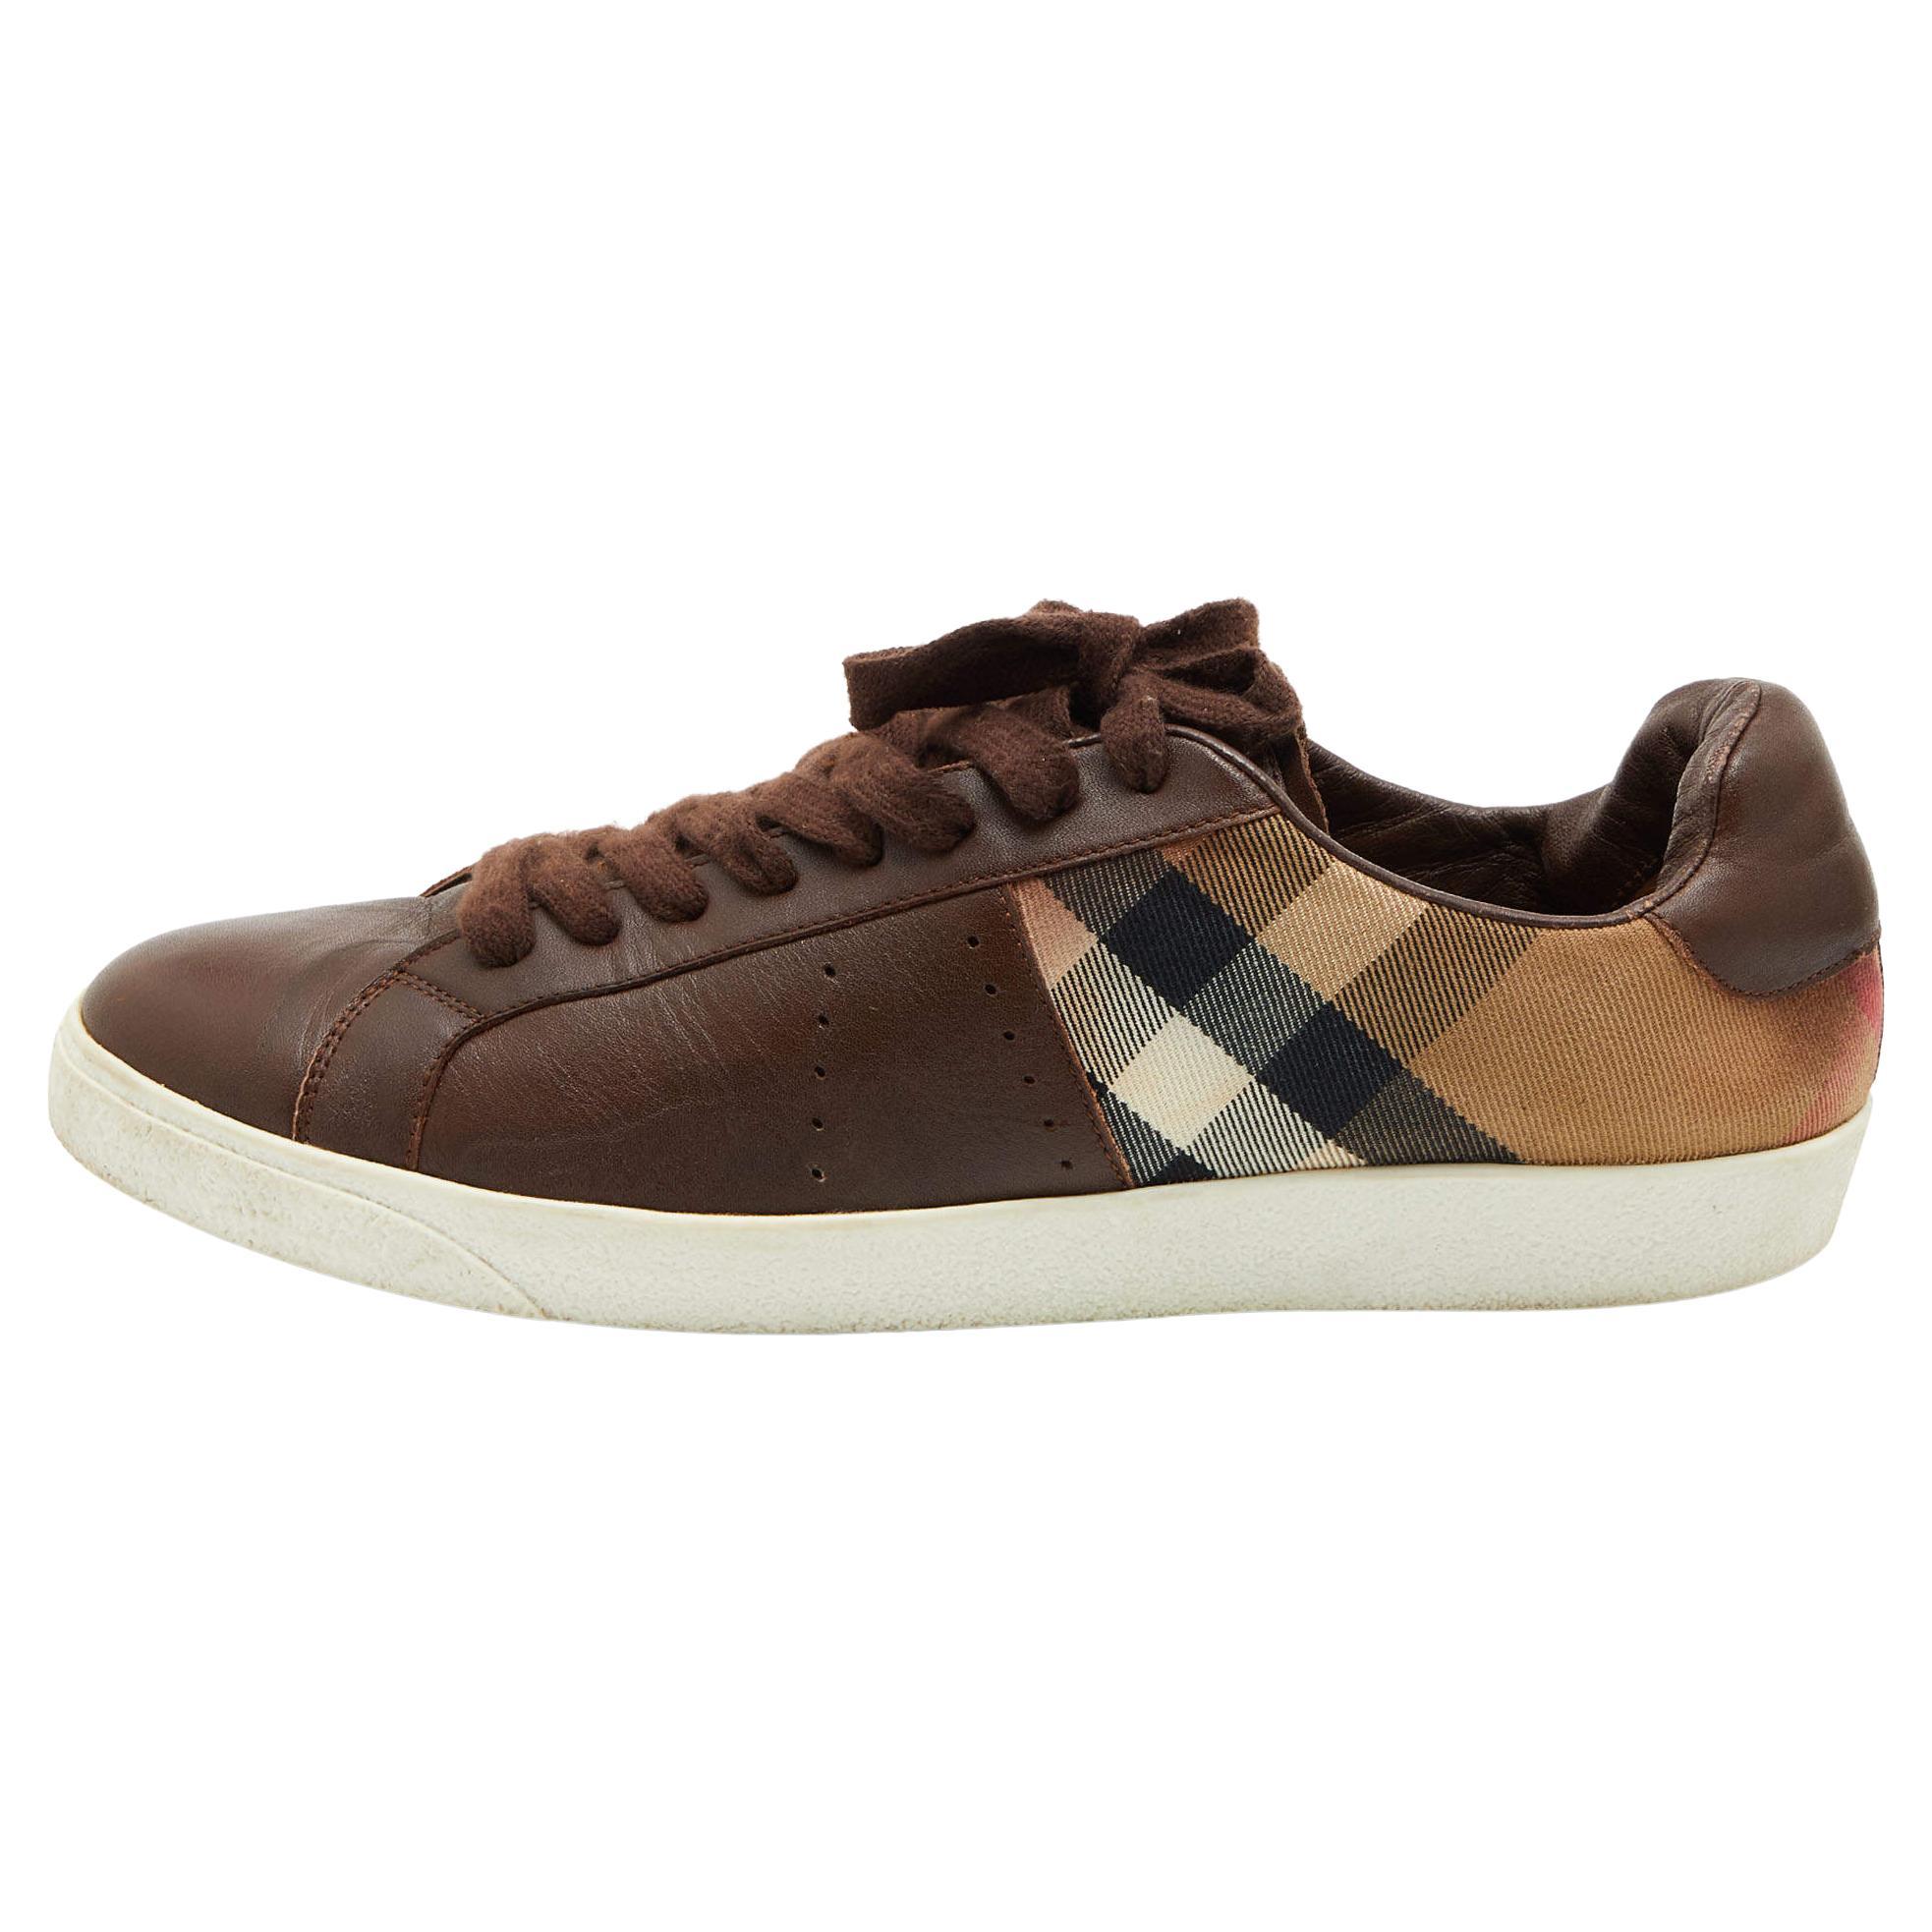 Burberry Brown Leather and Nova Check Canvas Low Top Sneakers Size 45